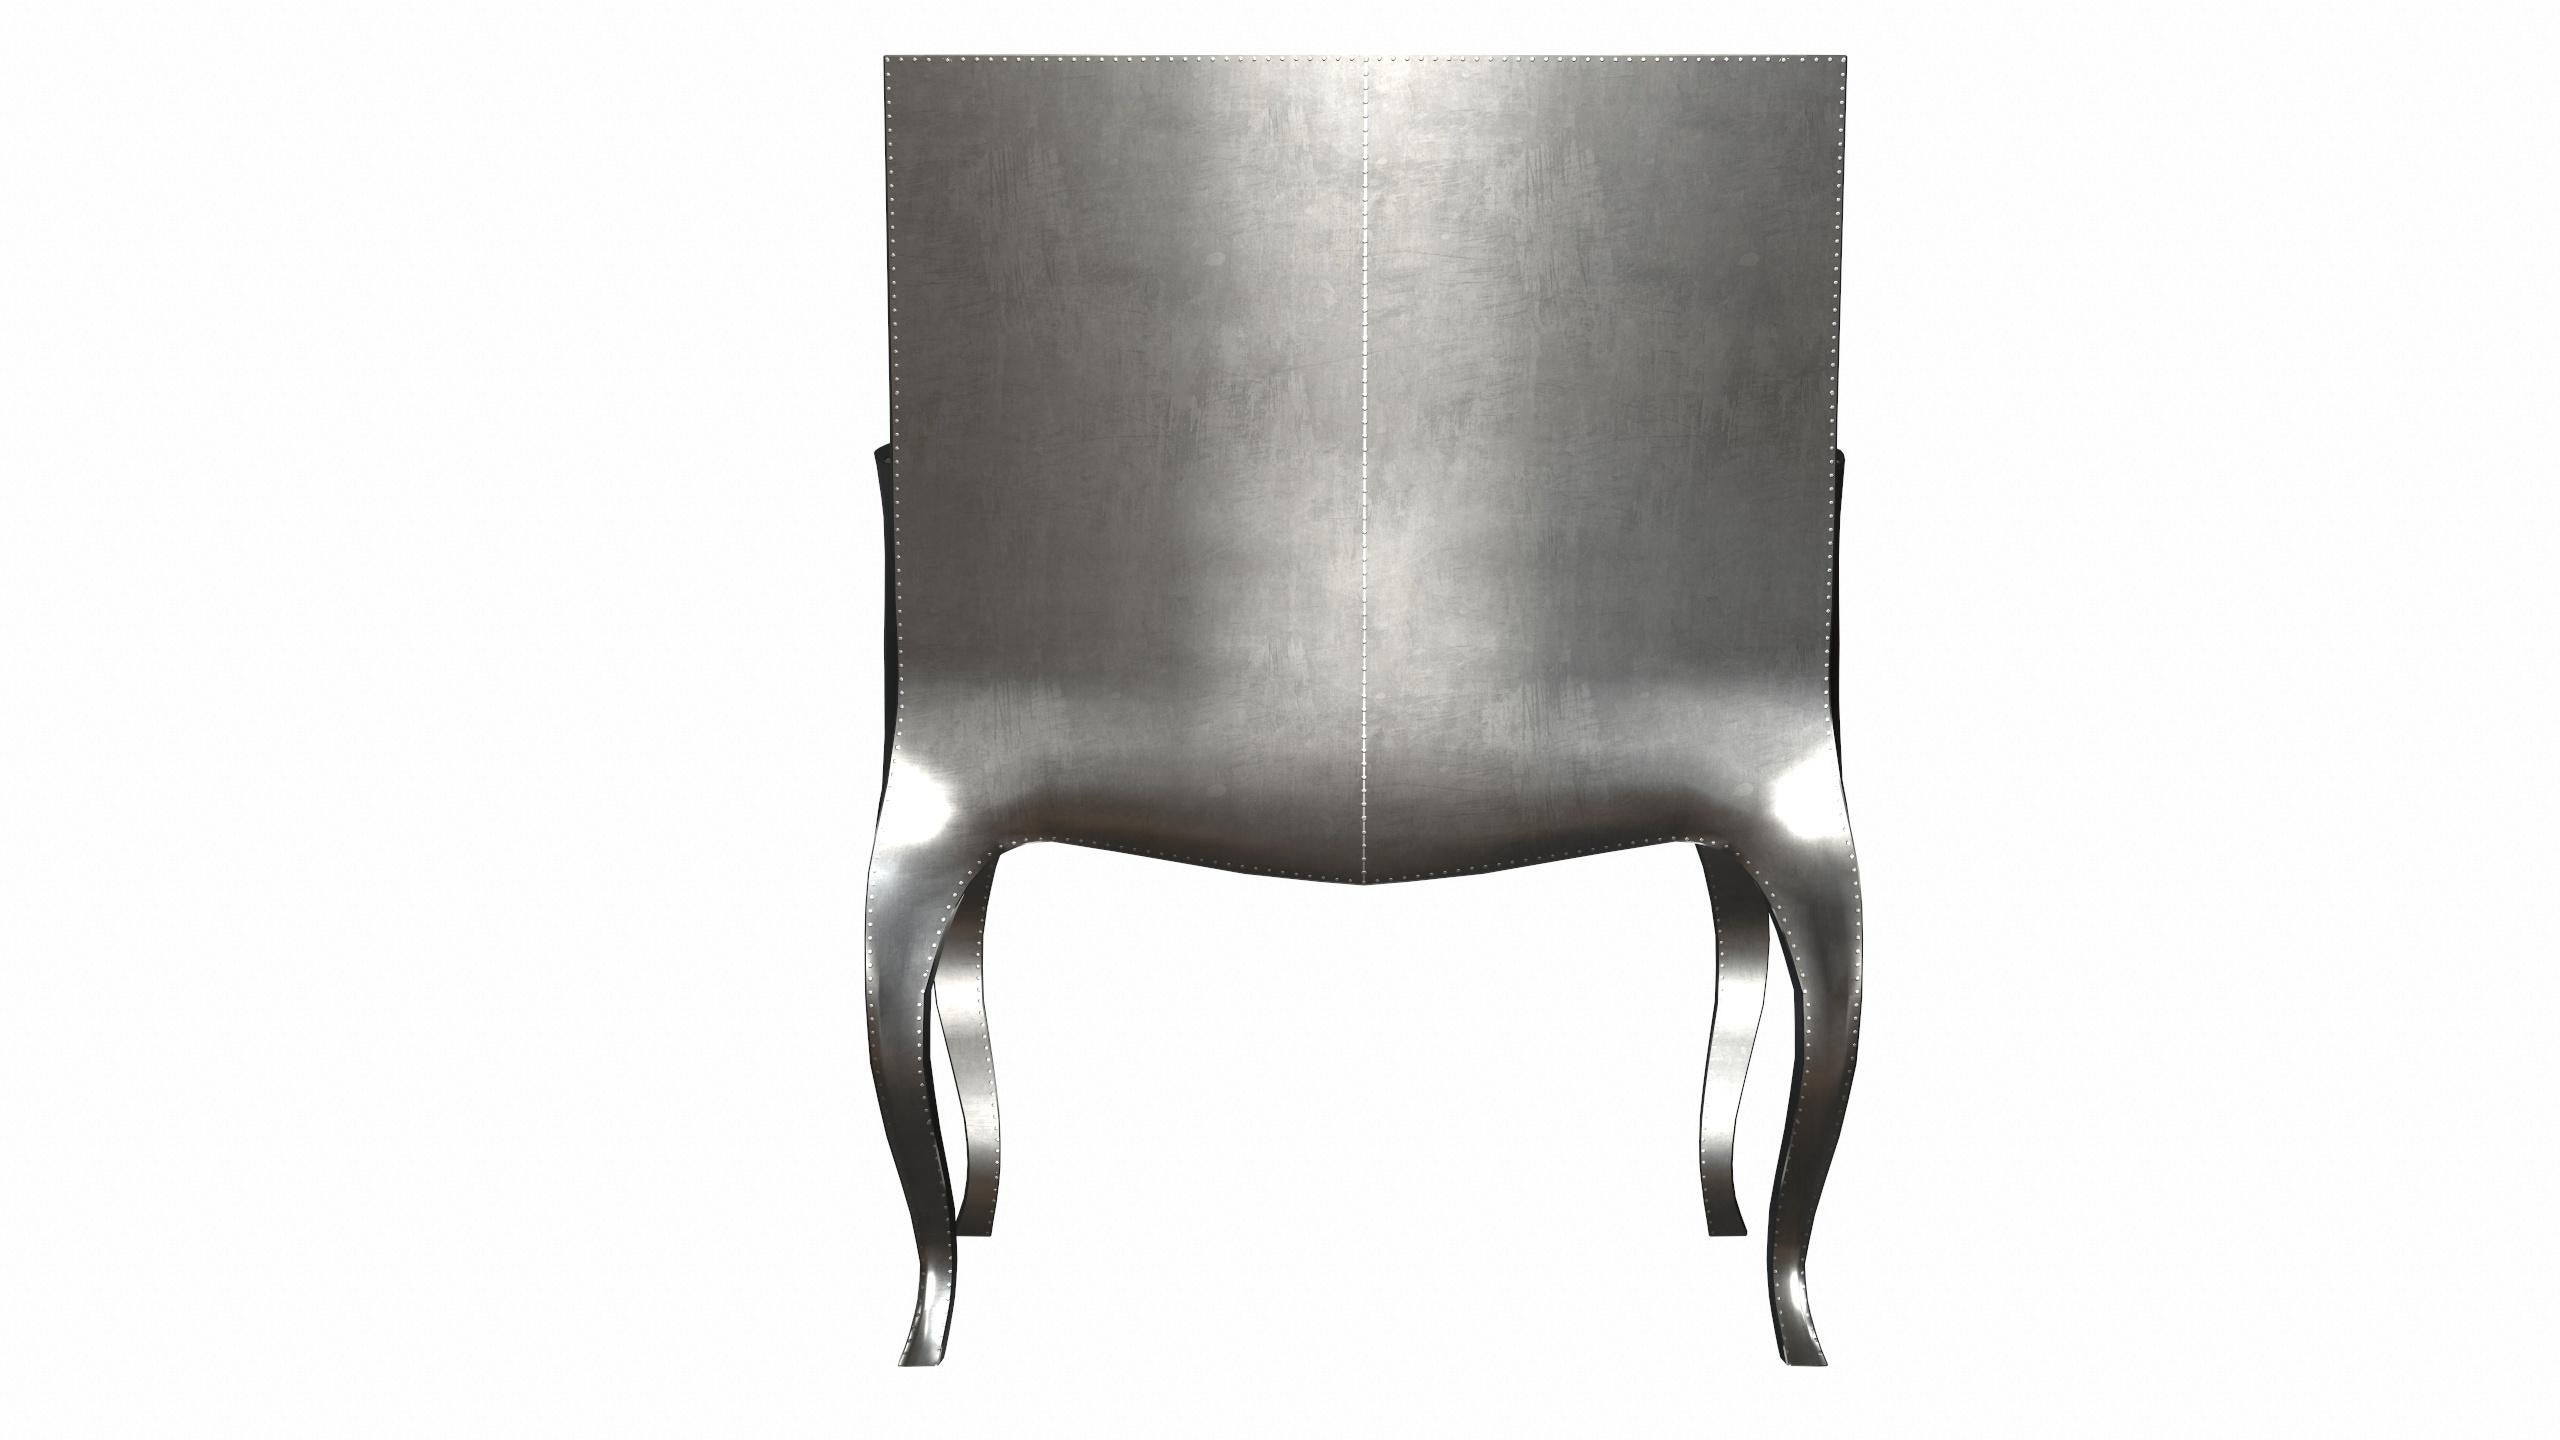 Art Deco Style Chairs in Smooth White Bronze by Paul Mathieu for S. Odegard For Sale 9